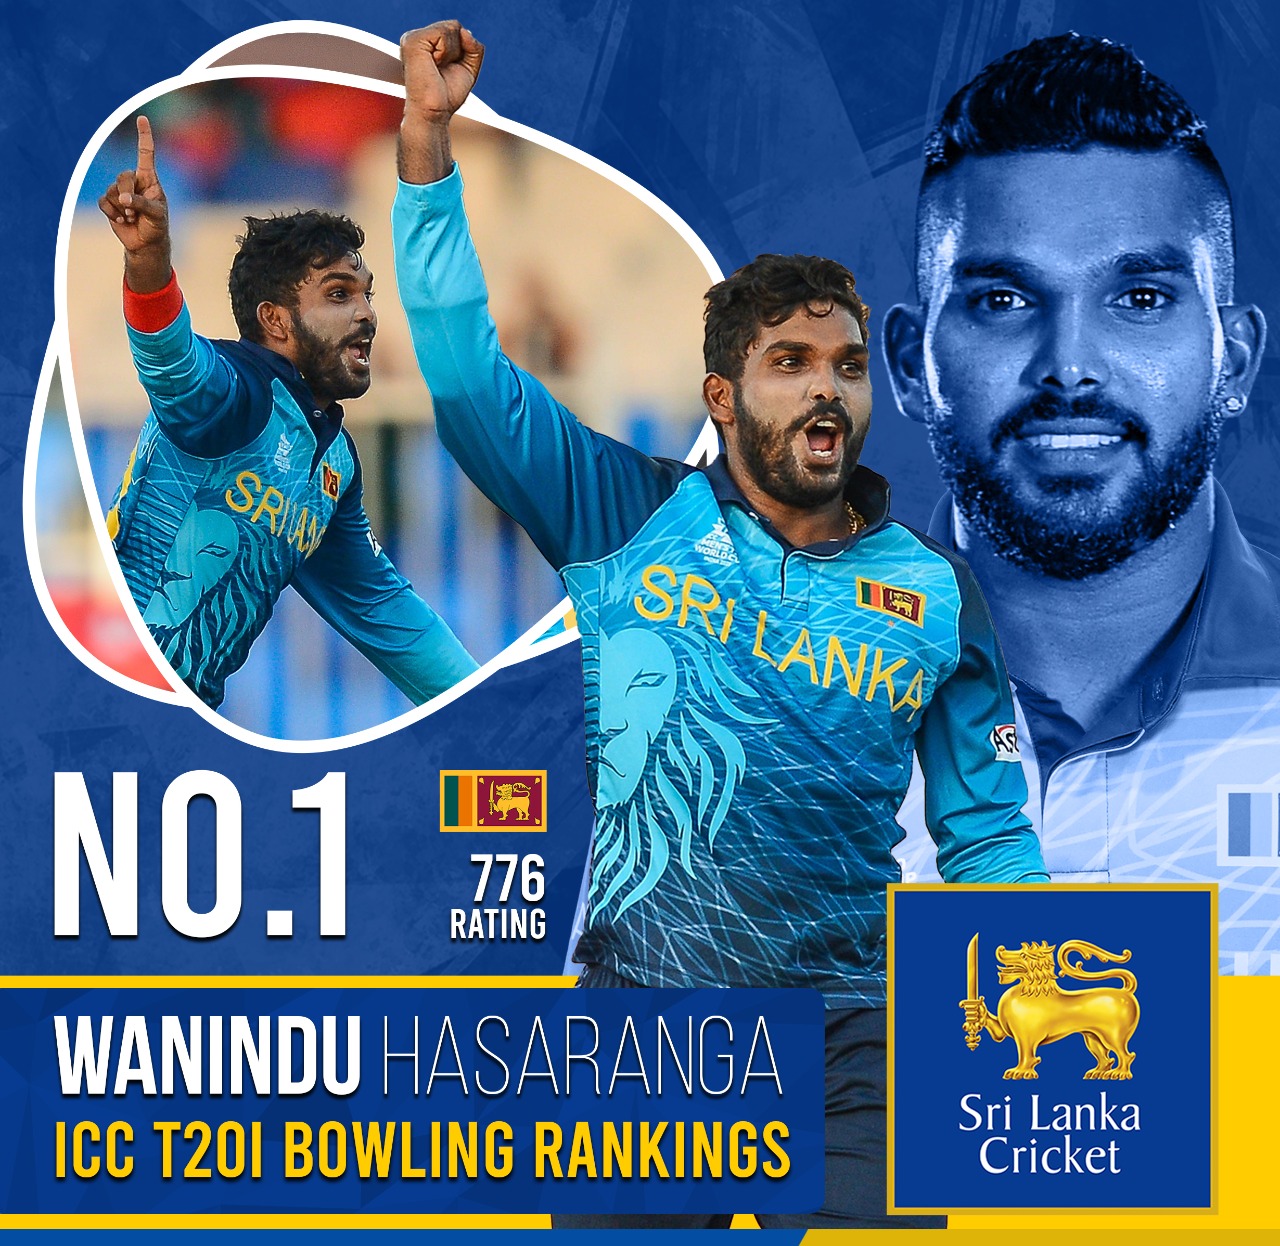 Wanindu Hasaranga milestone double – leading wicket taker at world cup to topping ICC T20 bowling rankings